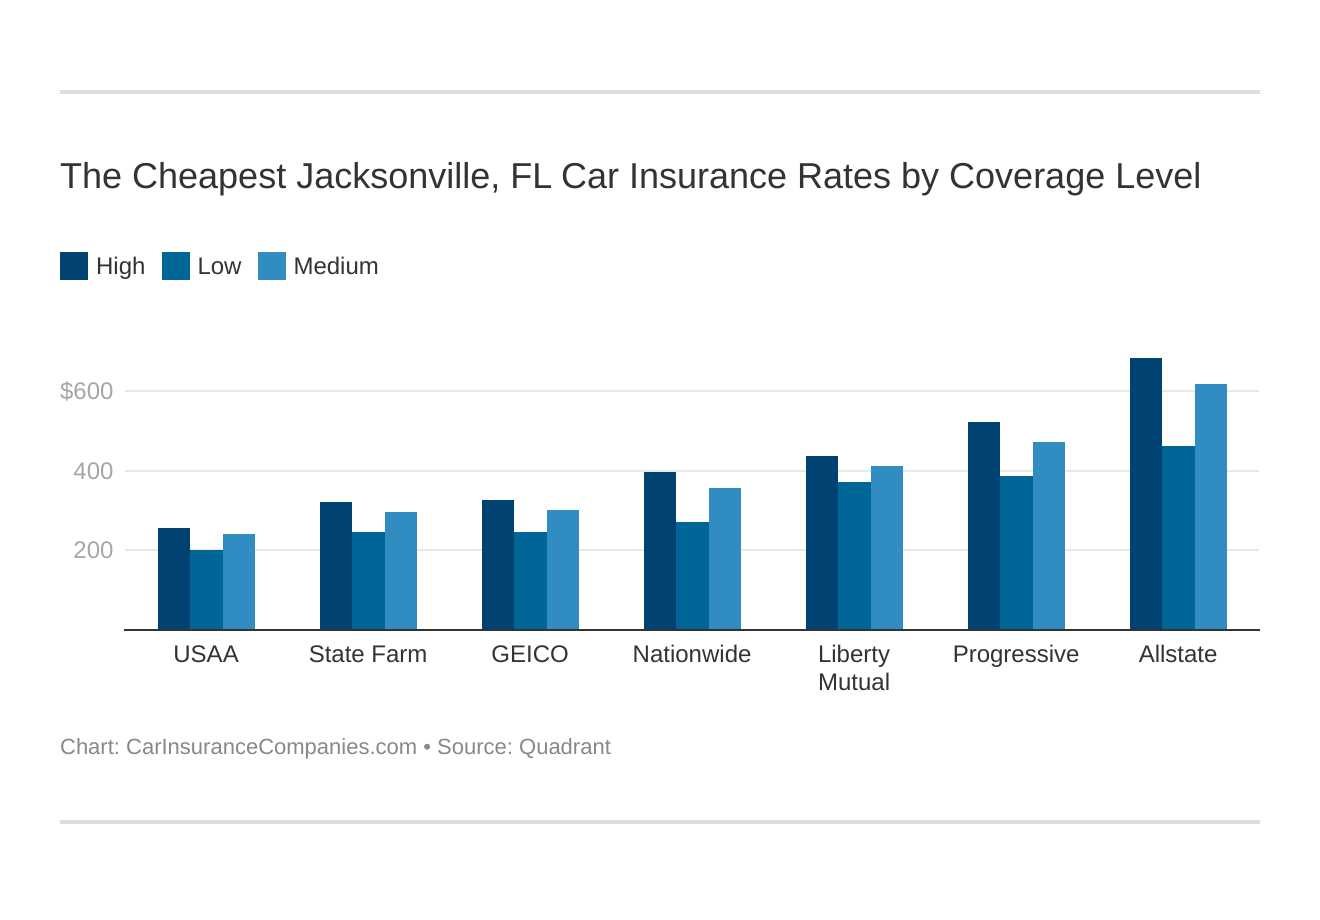 The Cheapest Jacksonville, FL Car Insurance Rates by Coverage Level